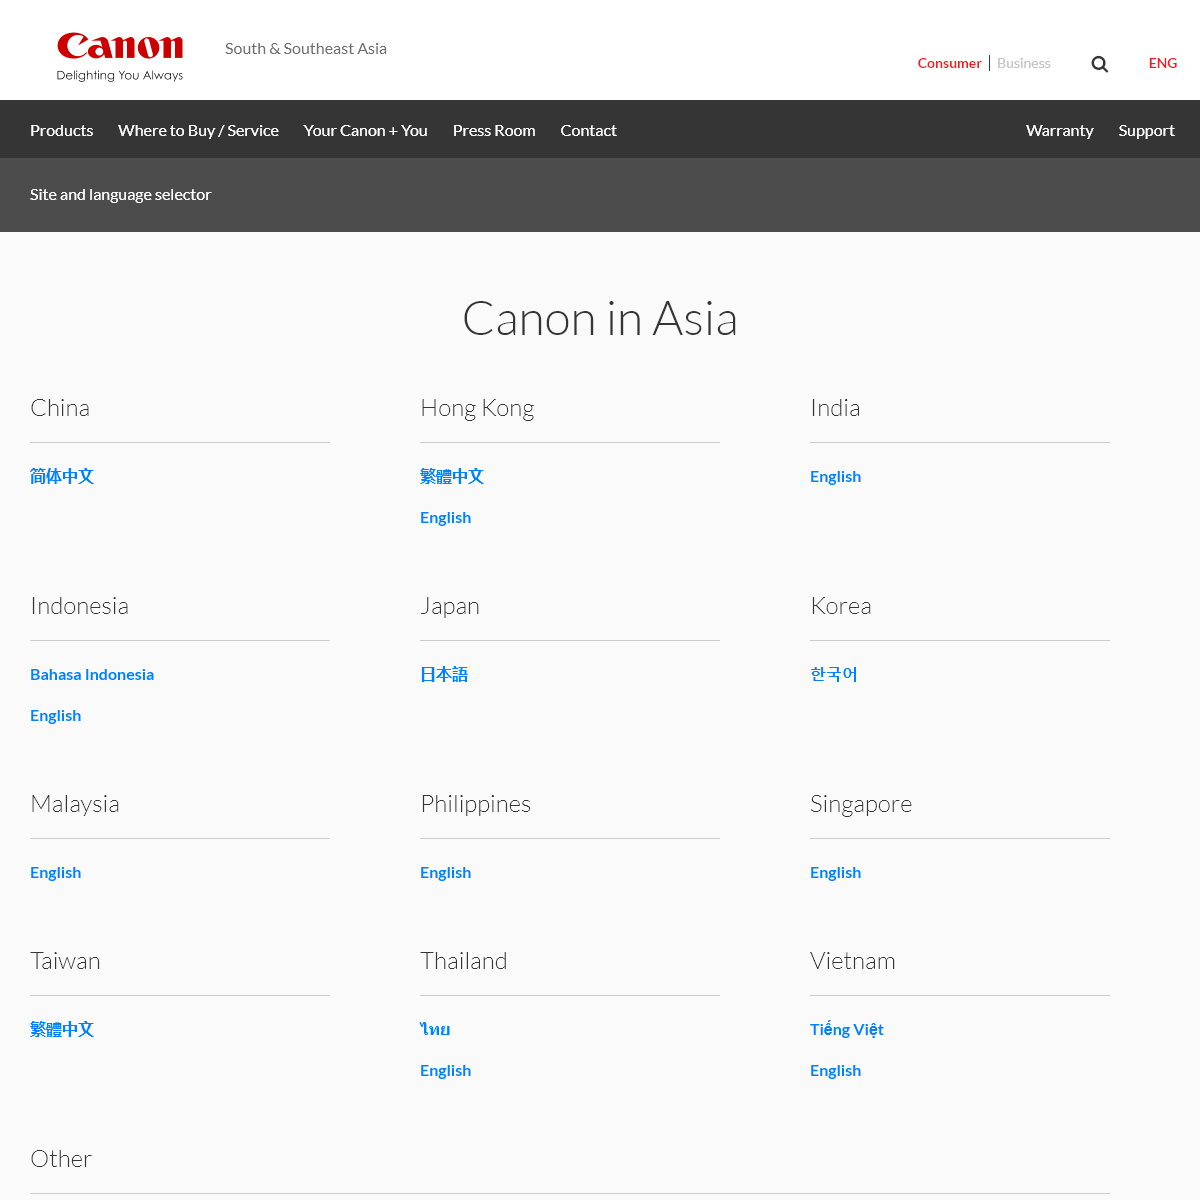 A complete backup of canon-asia.com